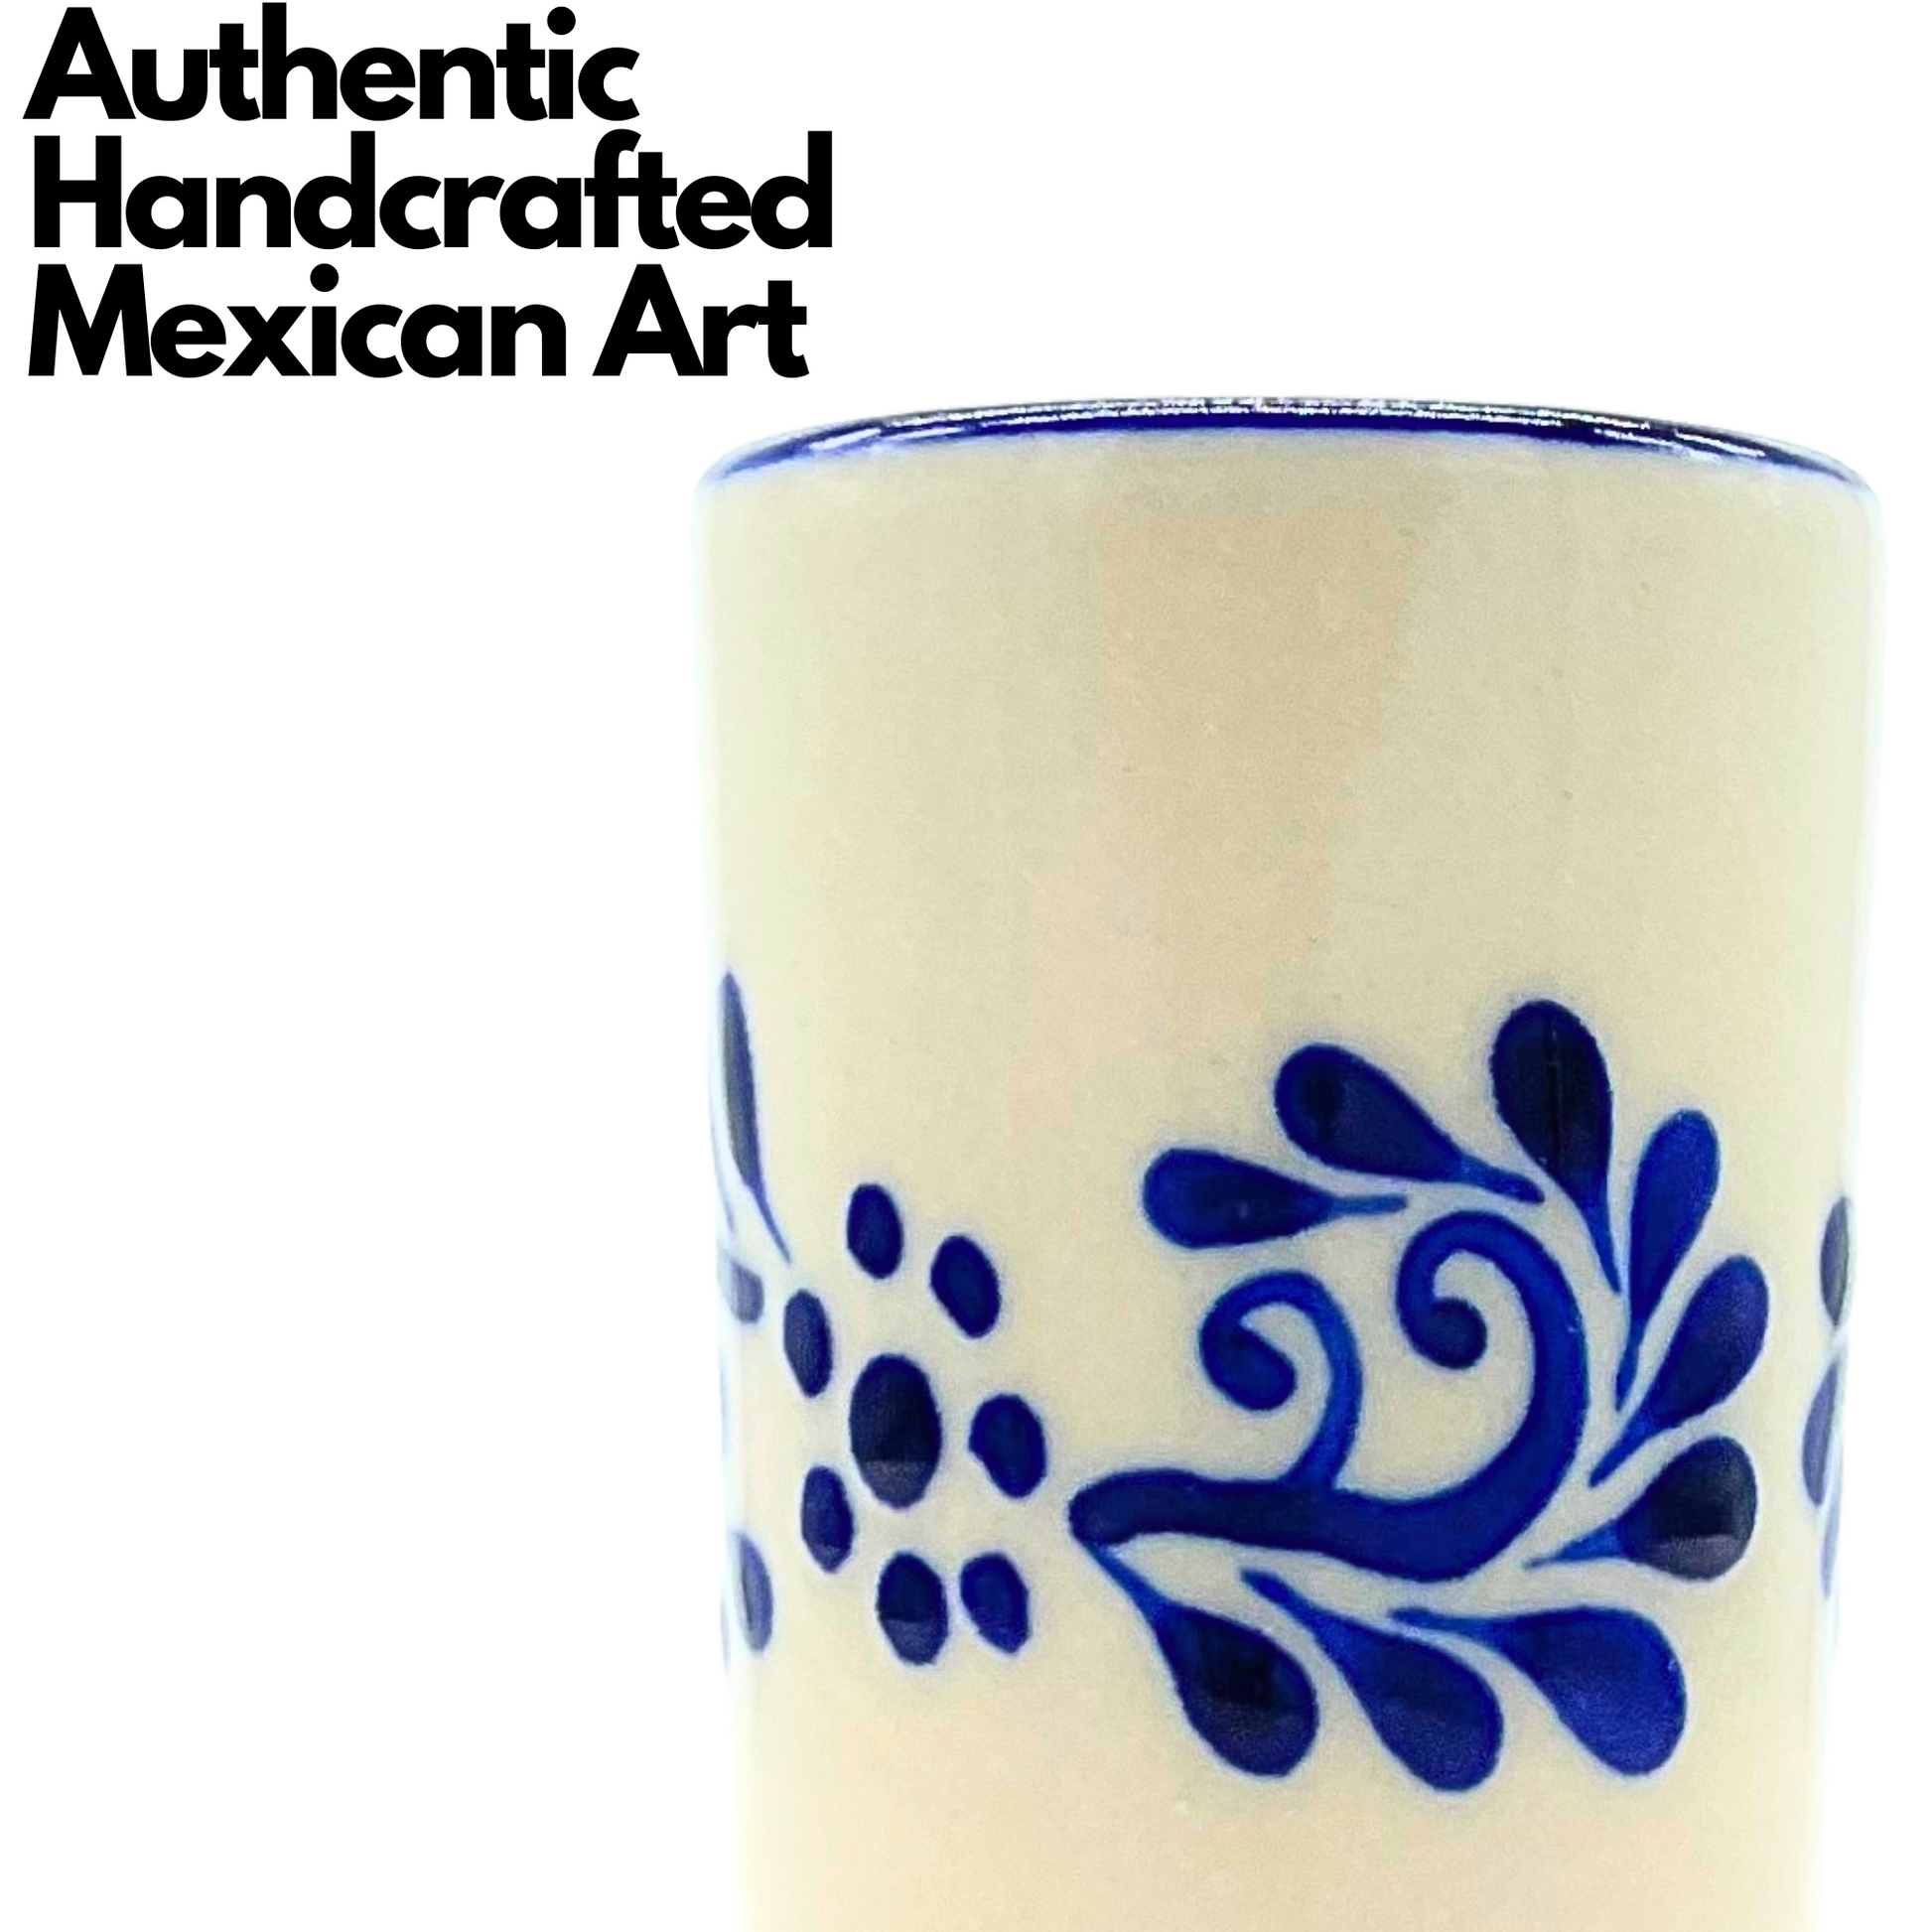 A set of two vibrant, hand-painted Mexican ceramic shot glasses, perfect for serving tequila or mezcal.